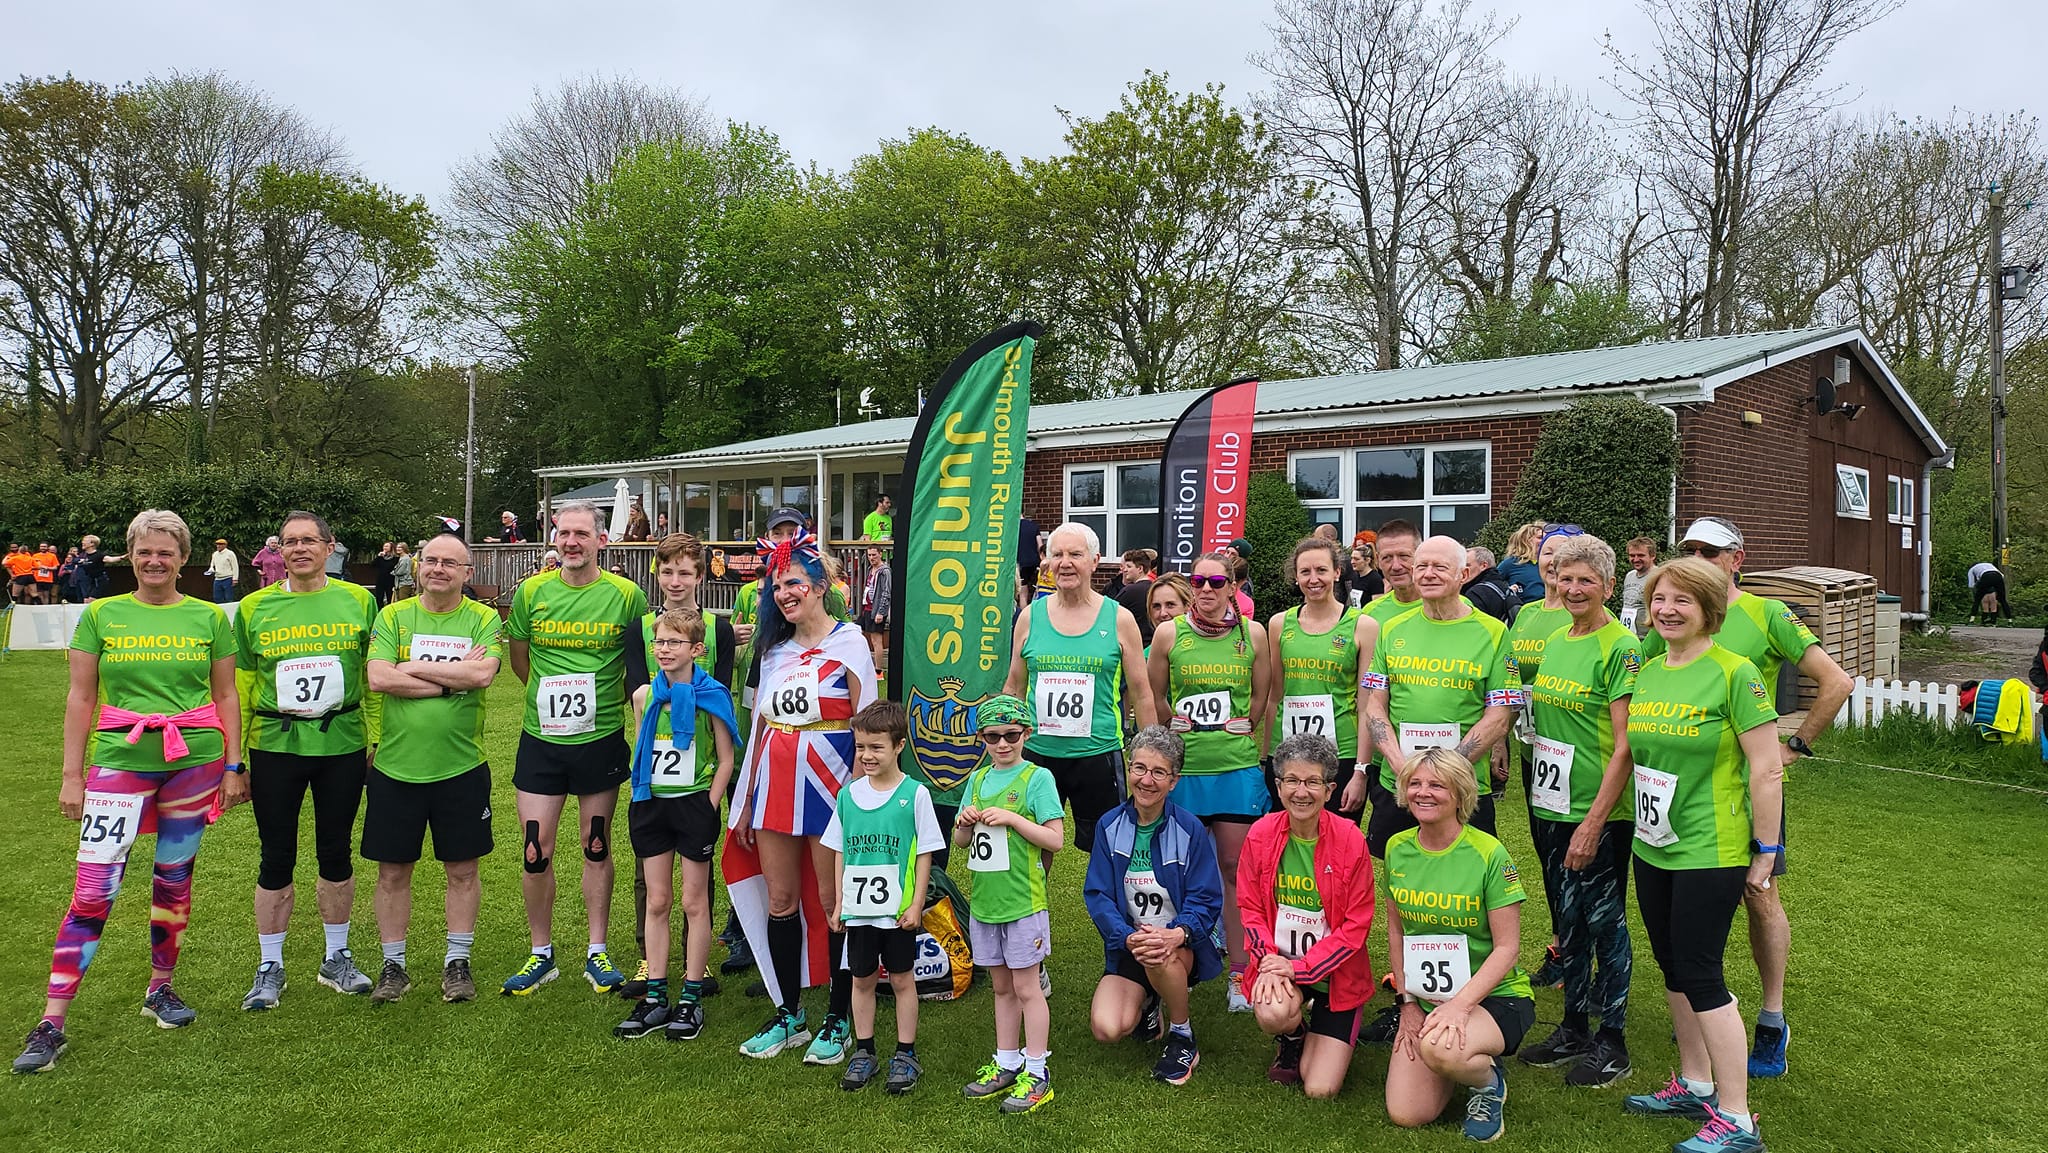 A Mighty Green Turnout For The Ottery 10k and Fun Run